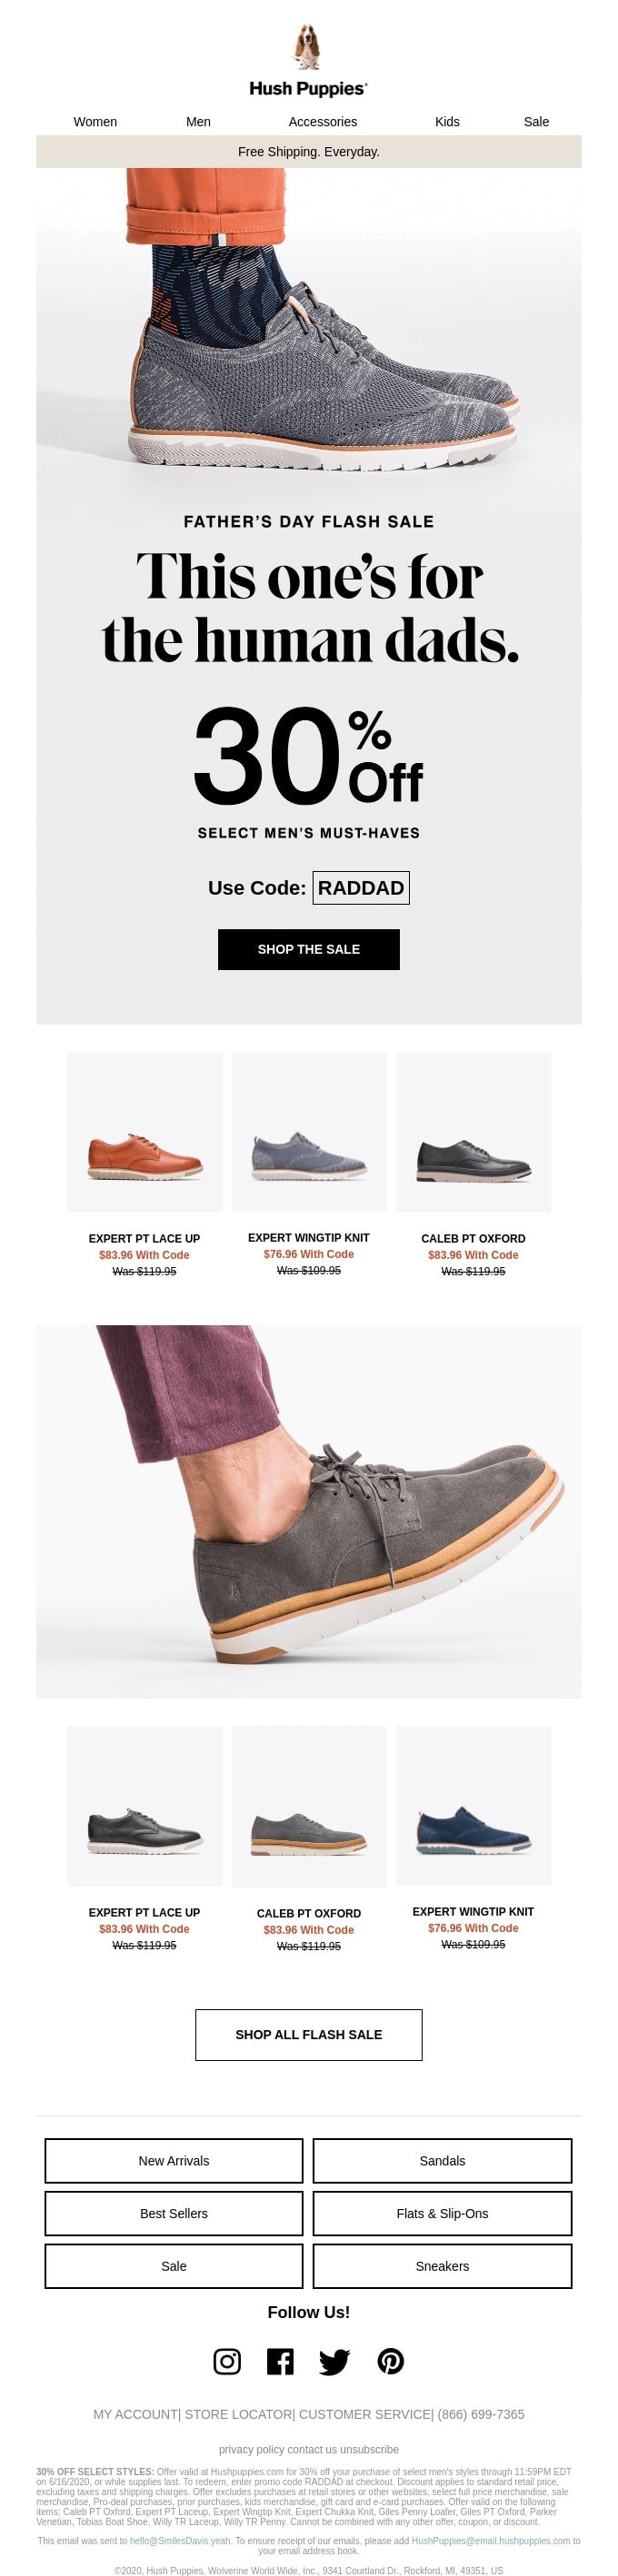 hush-puppies-fathers-day-email